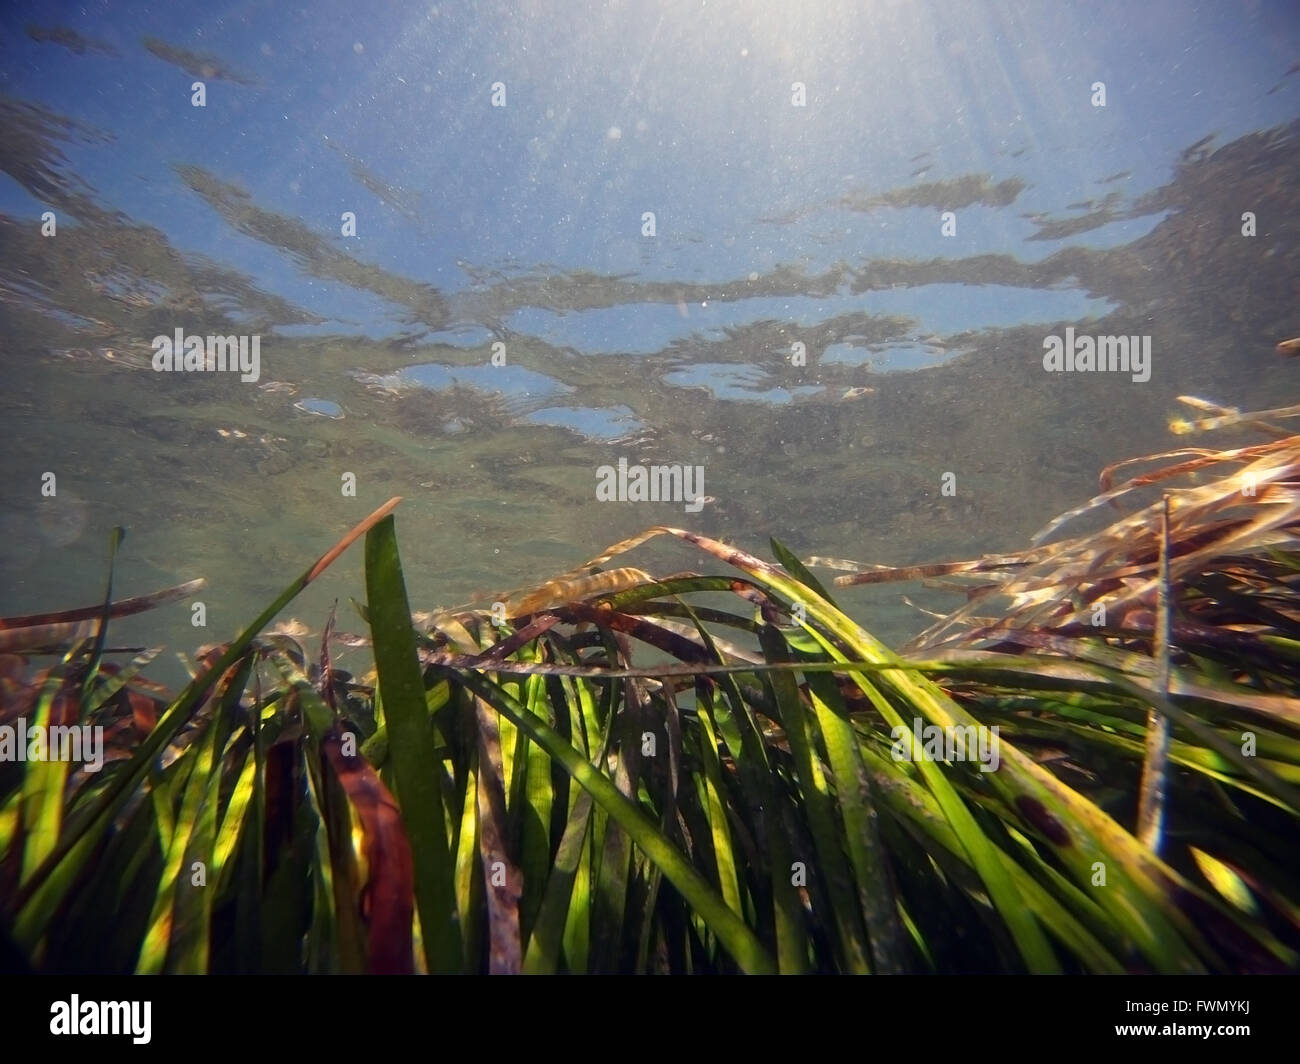 Healthy seagrass meadow (Zostera sp.) in shallow water, Rottnest Island, Western Australia Stock Photo